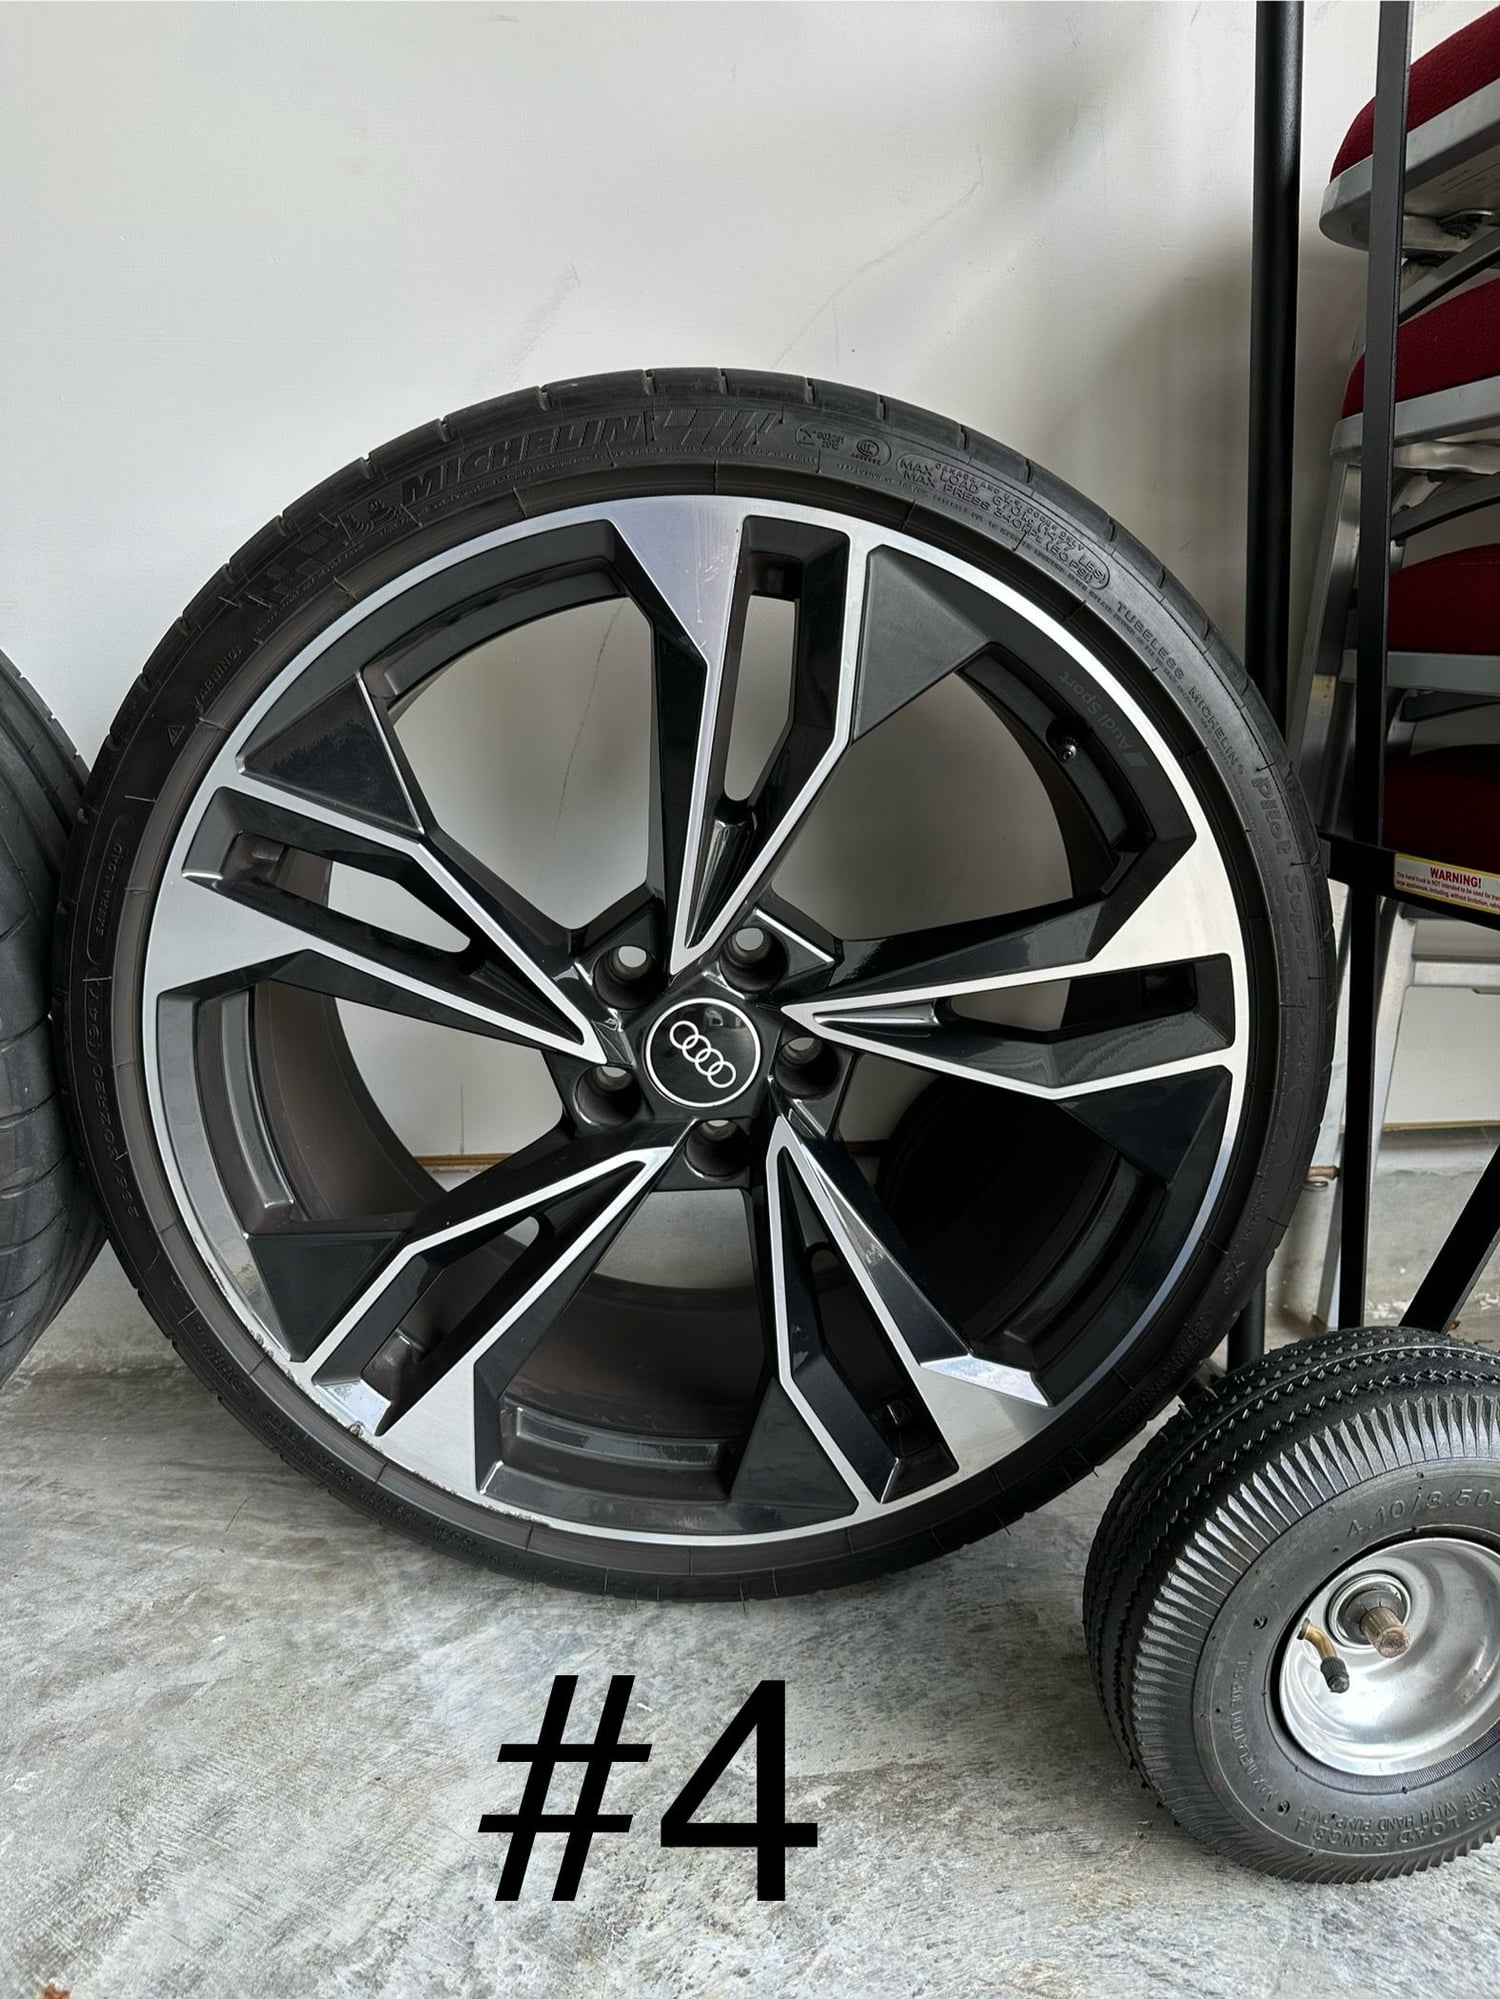 Wheels and Tires/Axles - Audi S5 Black Optics 20" wheels with Michelin Pilot Super Sport tires - Used - 2018 to 2024 Audi S5 - 2018 to 2024 Audi A5 - 2018 to 2024 Audi S5 Sportback - Houston, TX 77346, United States